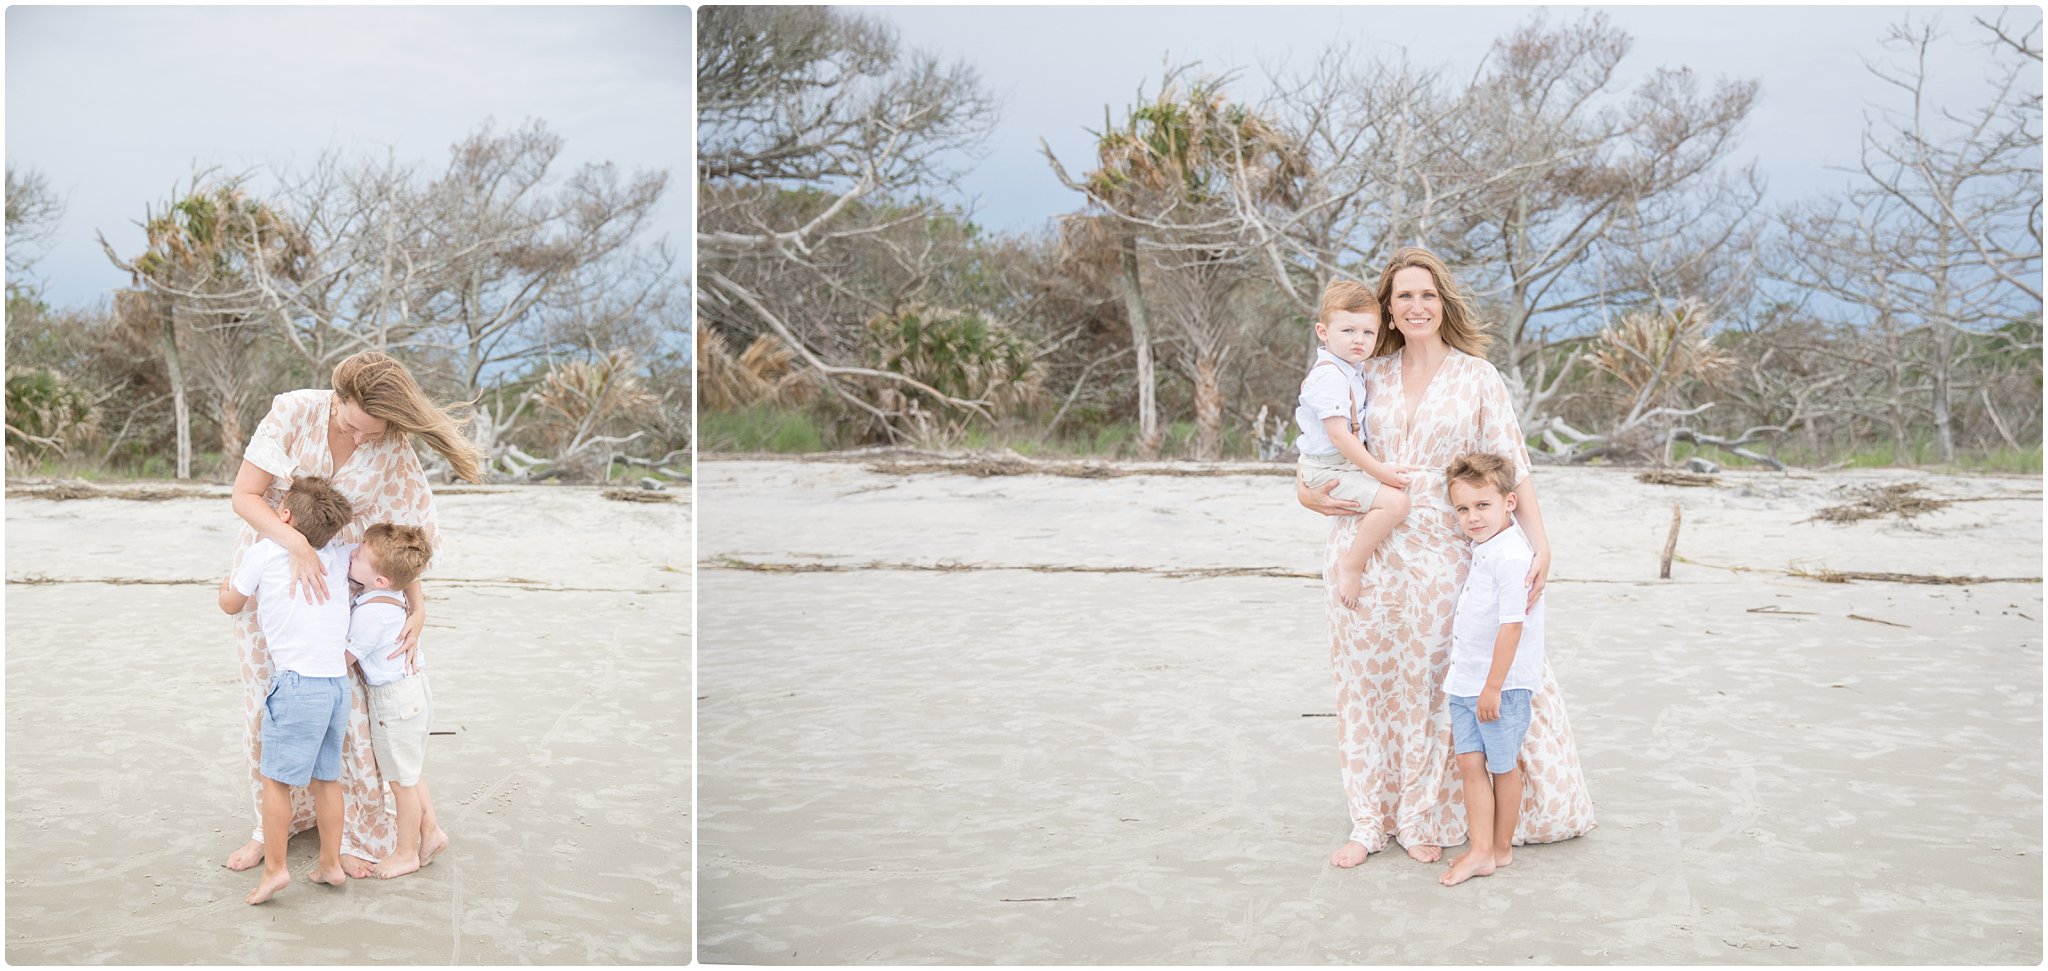 Candace hires photography | www.candacehiresphotography.com | jekyll island vacation